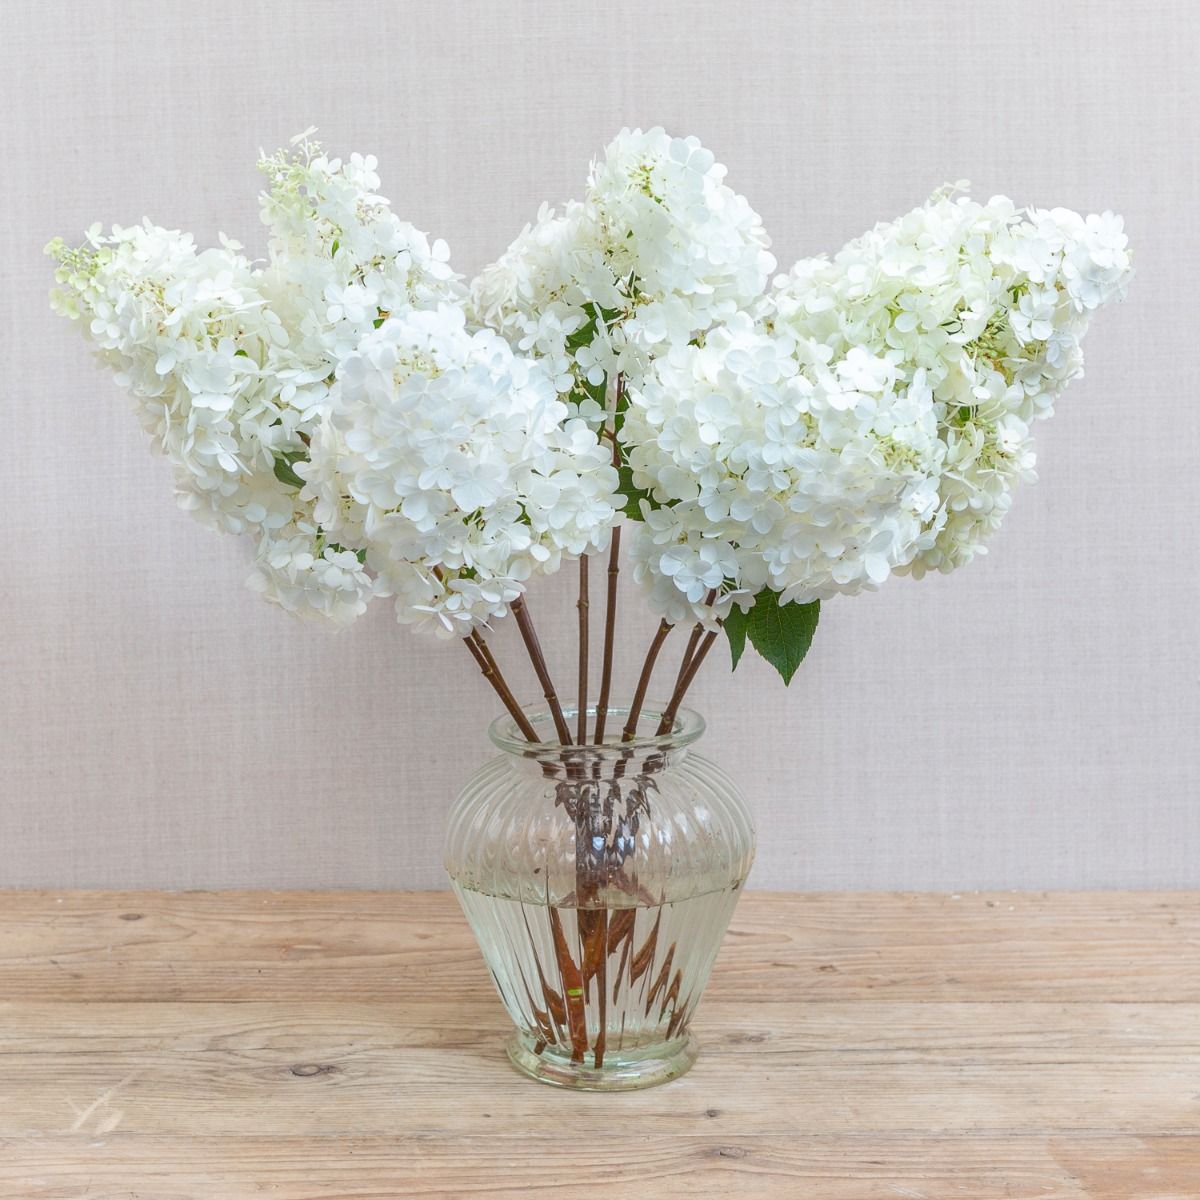 Ten things you should know about Hydrangeas